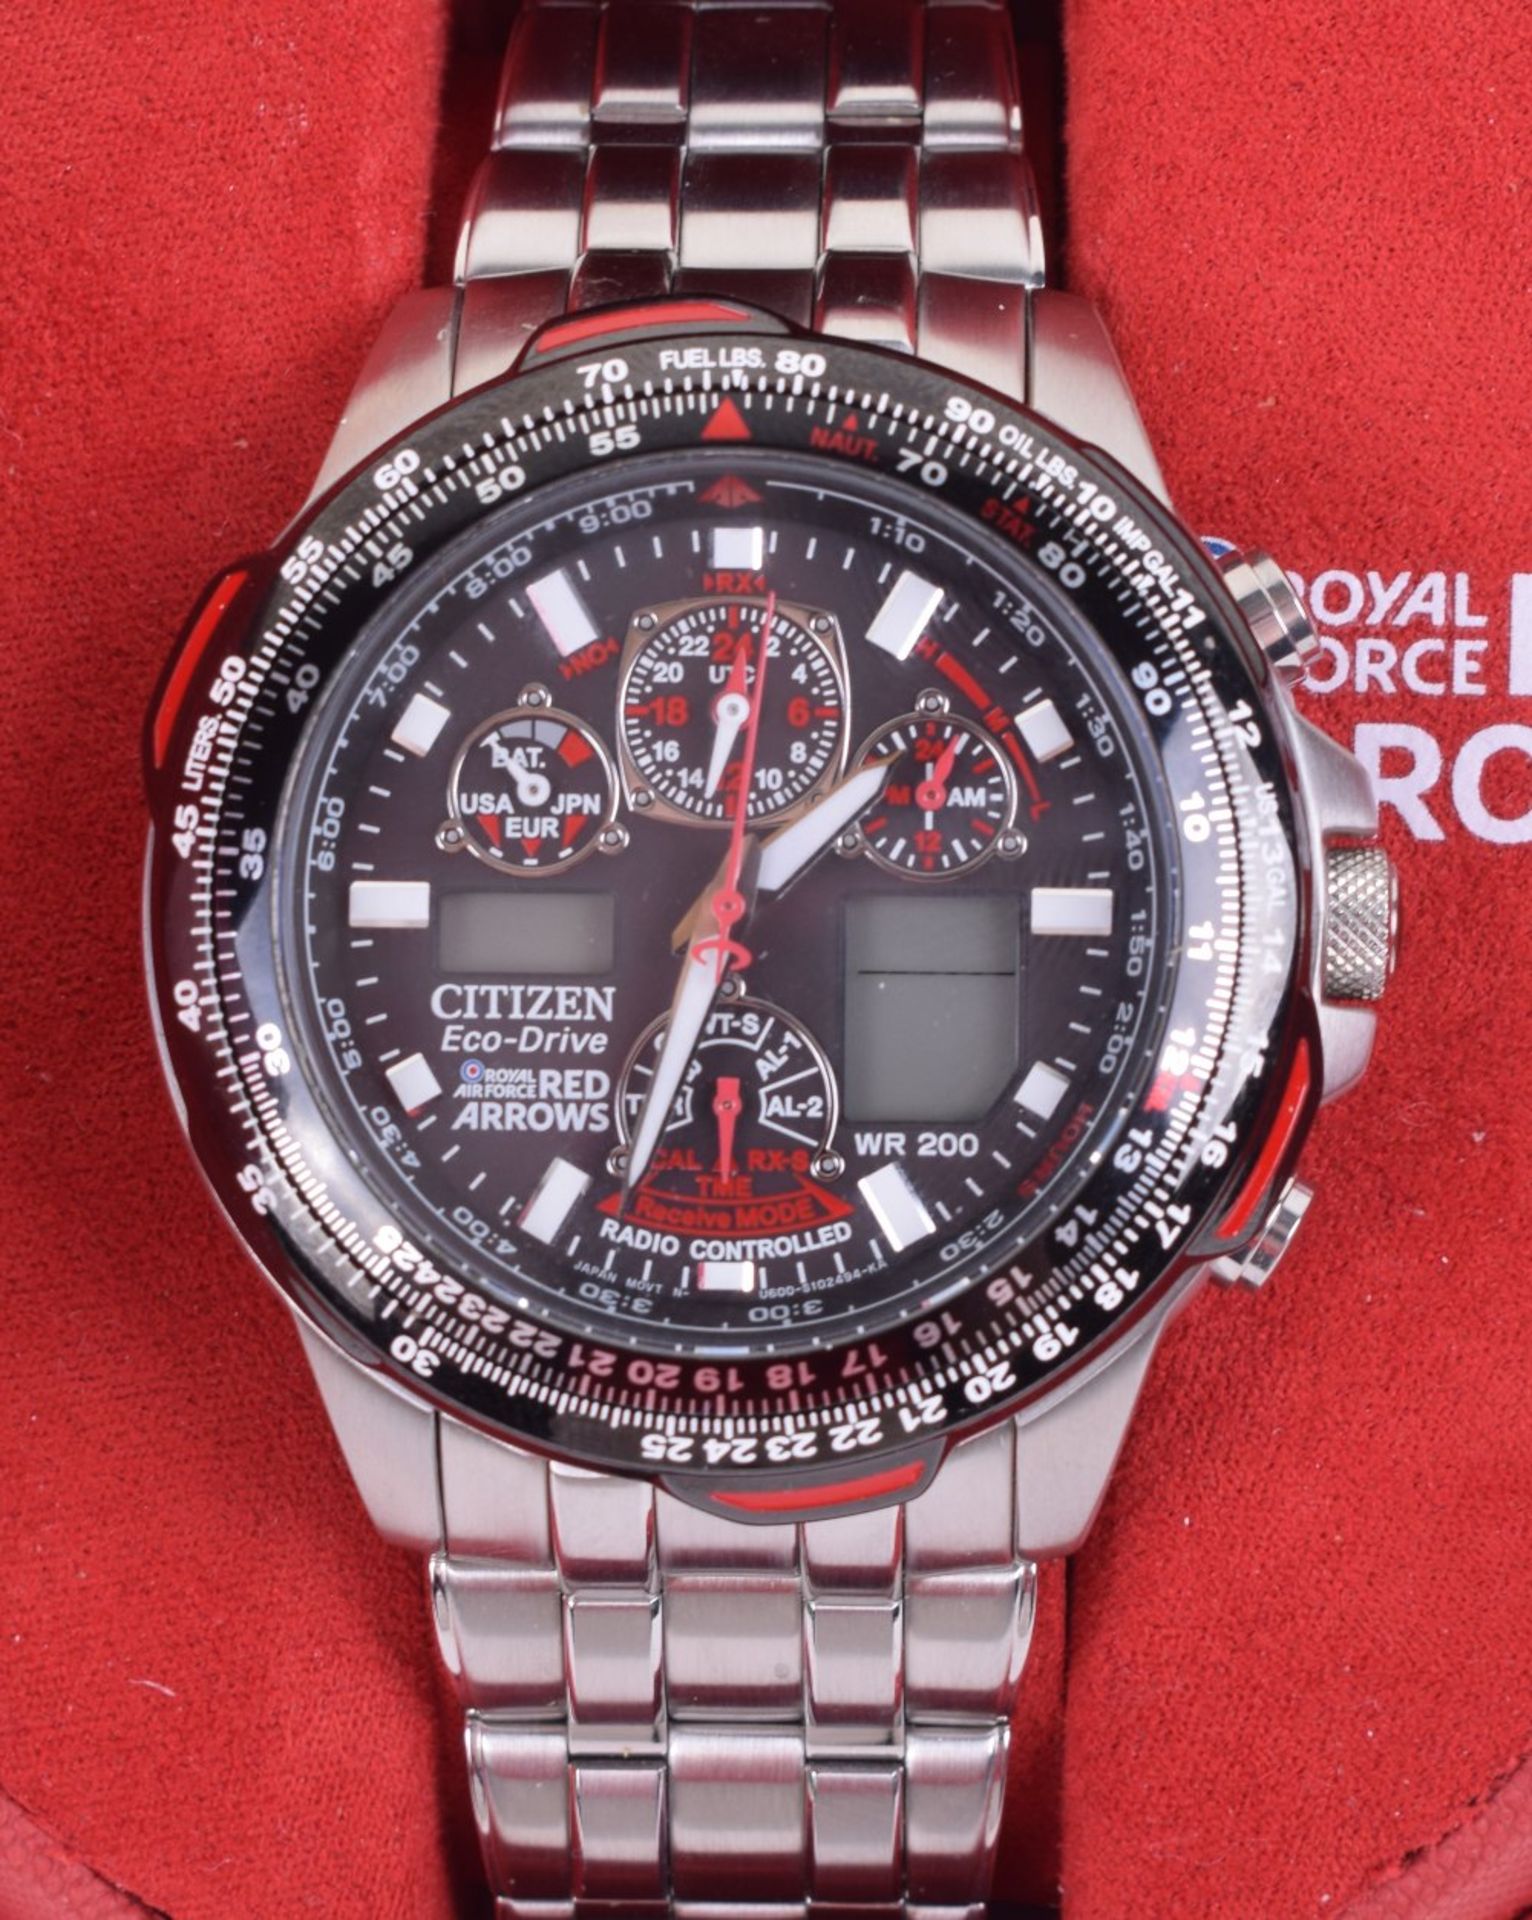 Gents Royal Air Force Red Arrows Skyhawk A.T. Watch - Image 2 of 2